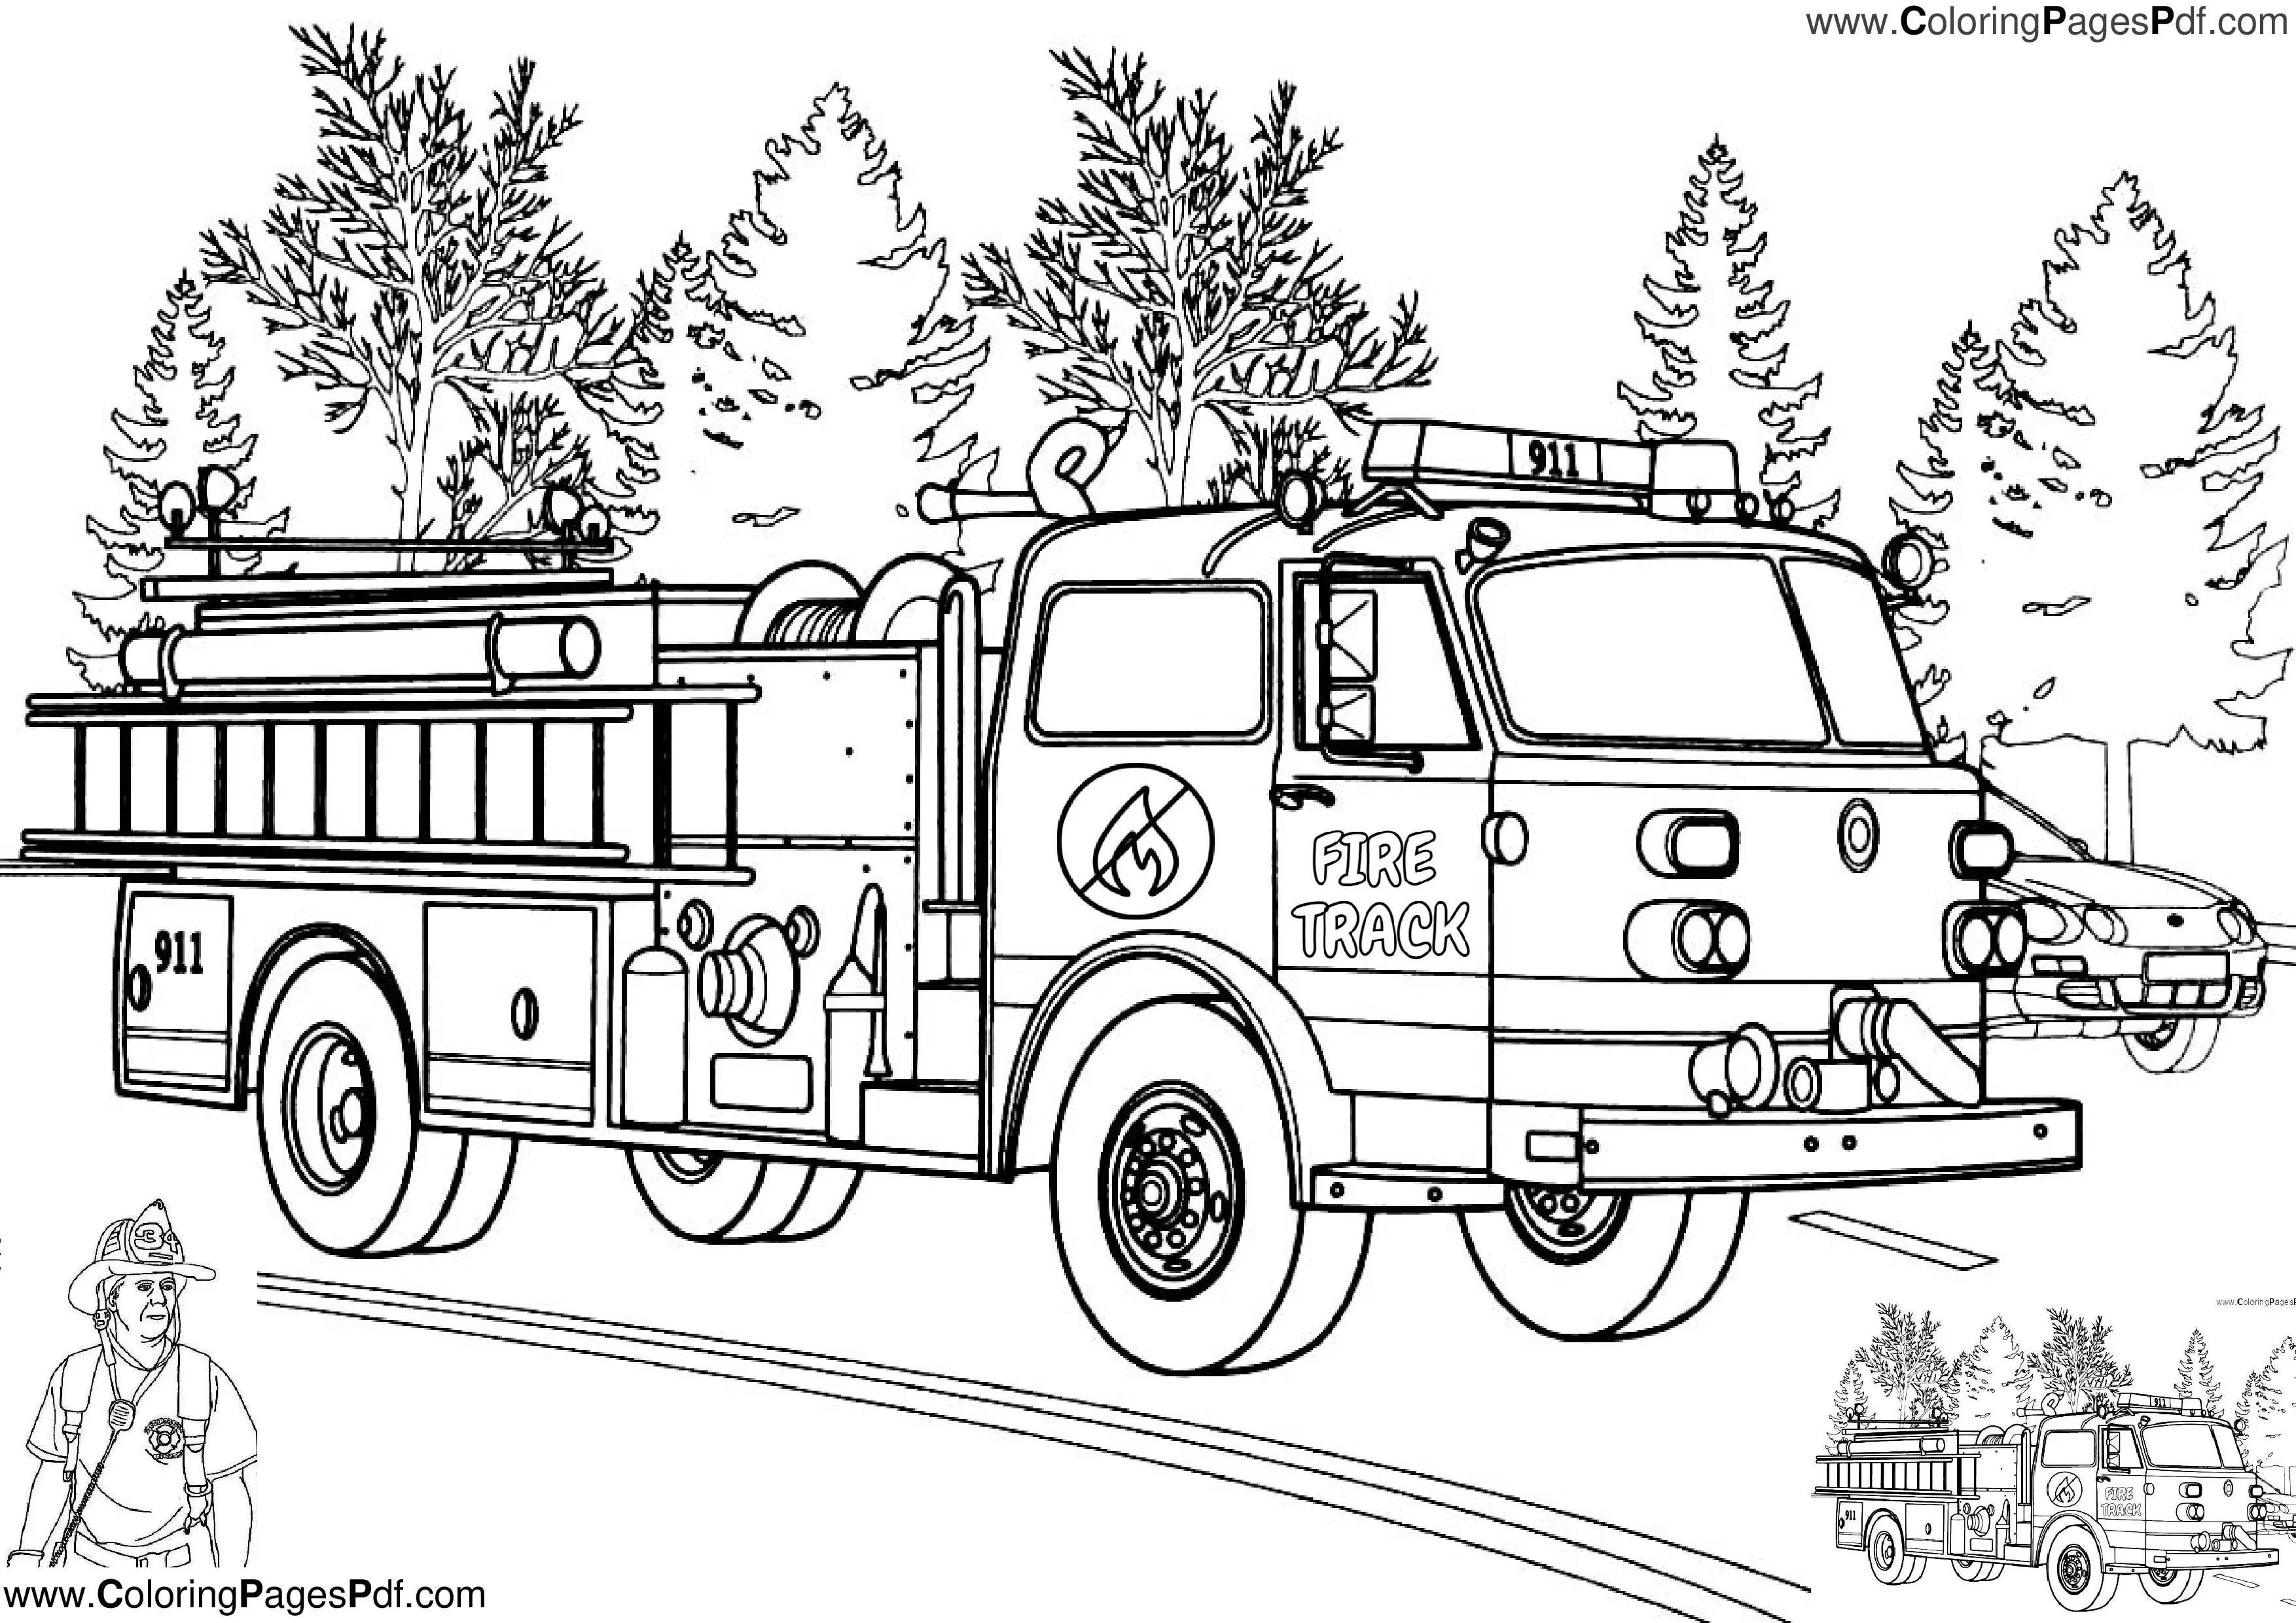 Fire truck coloring pages for adults